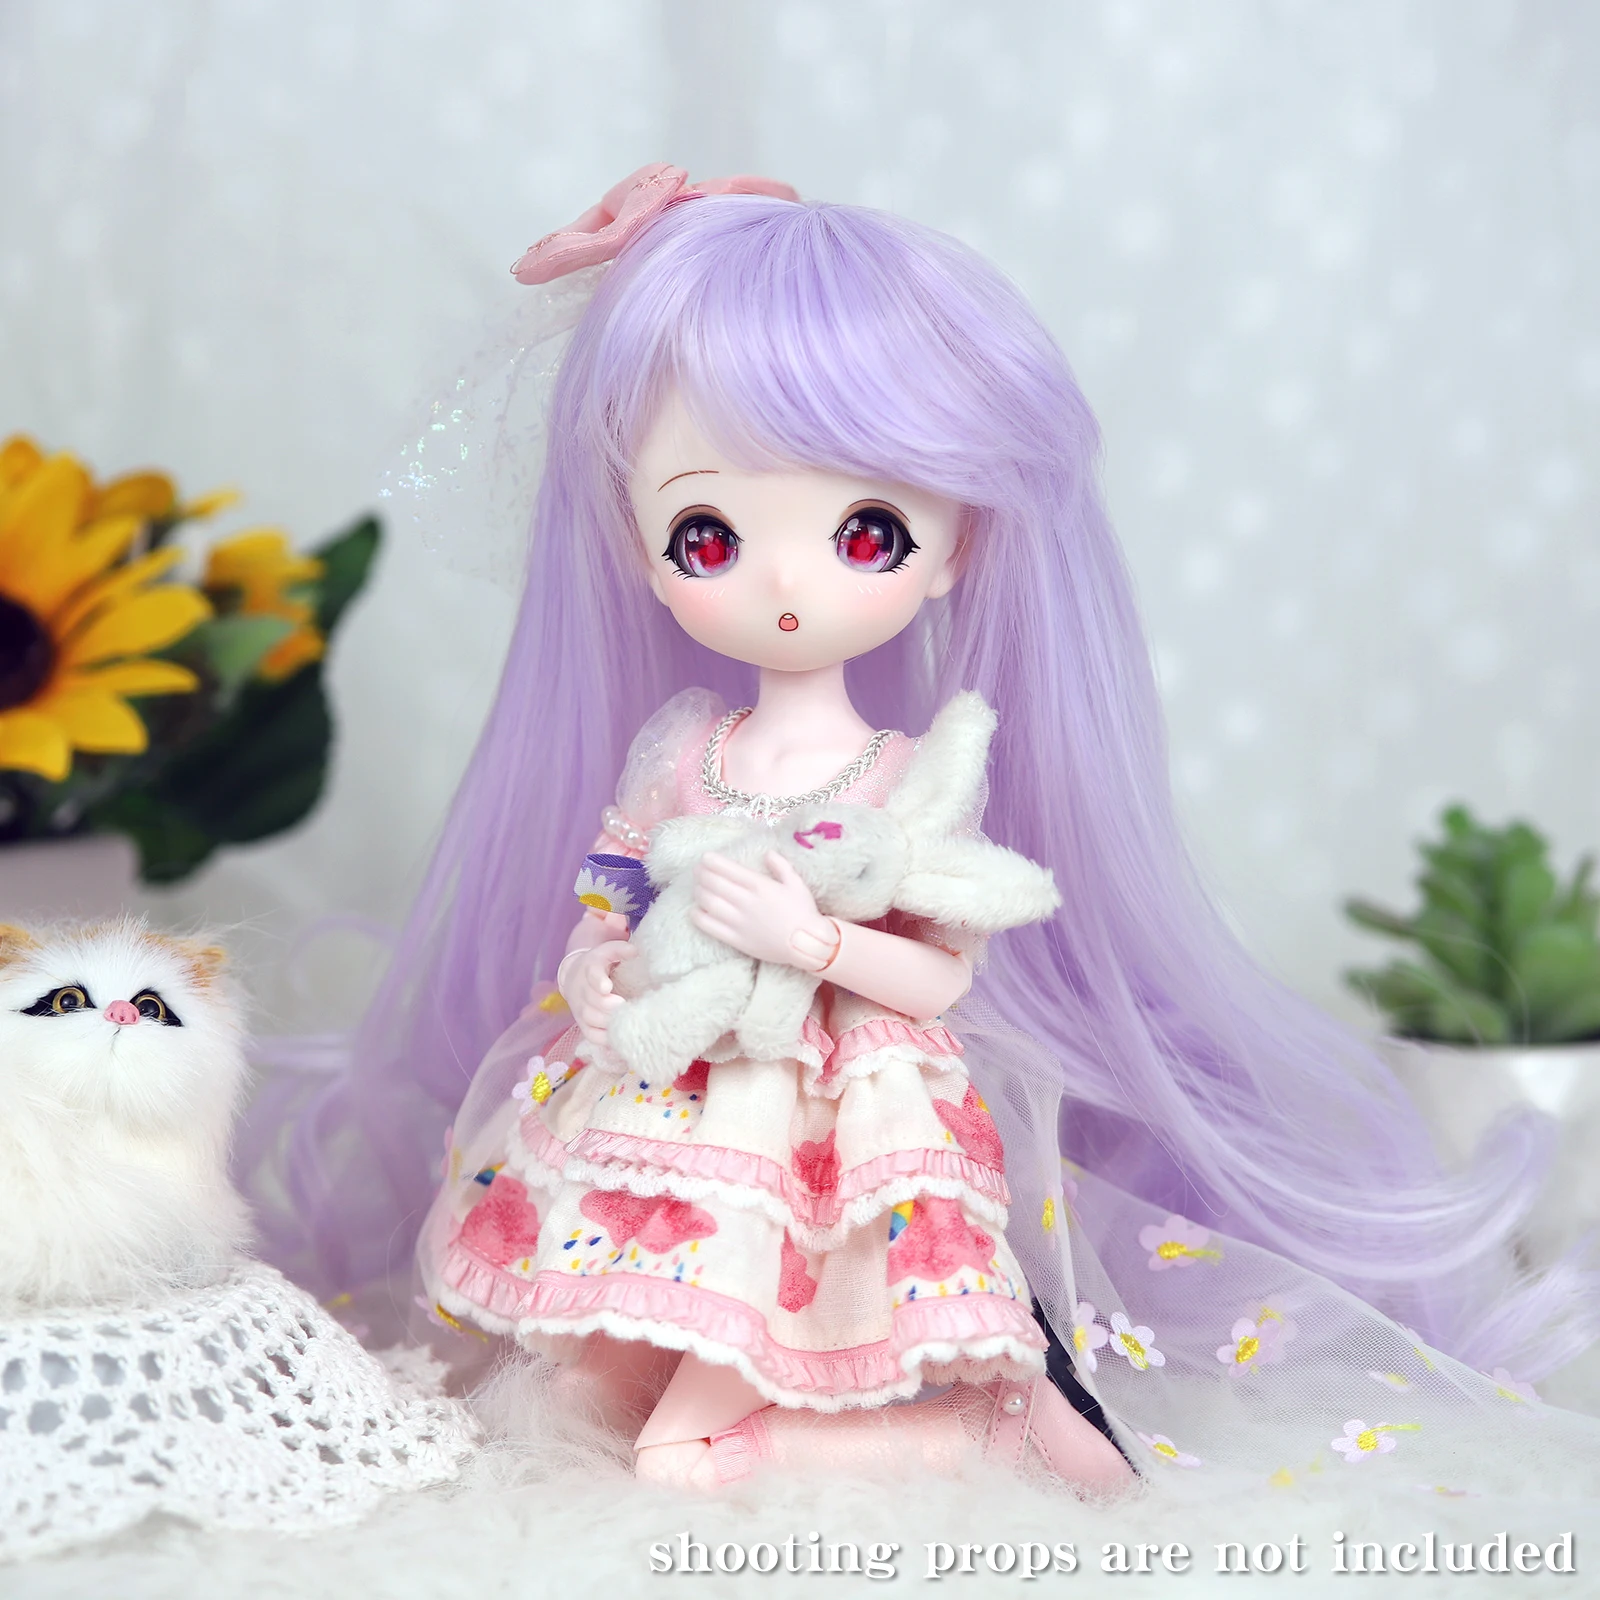 Accessories For DBS Doll 1/4 BJD Dream Fairy Match Girl Resin Anime Figure  Carton Lala Ruru Egg ACGN SD Collection Toy